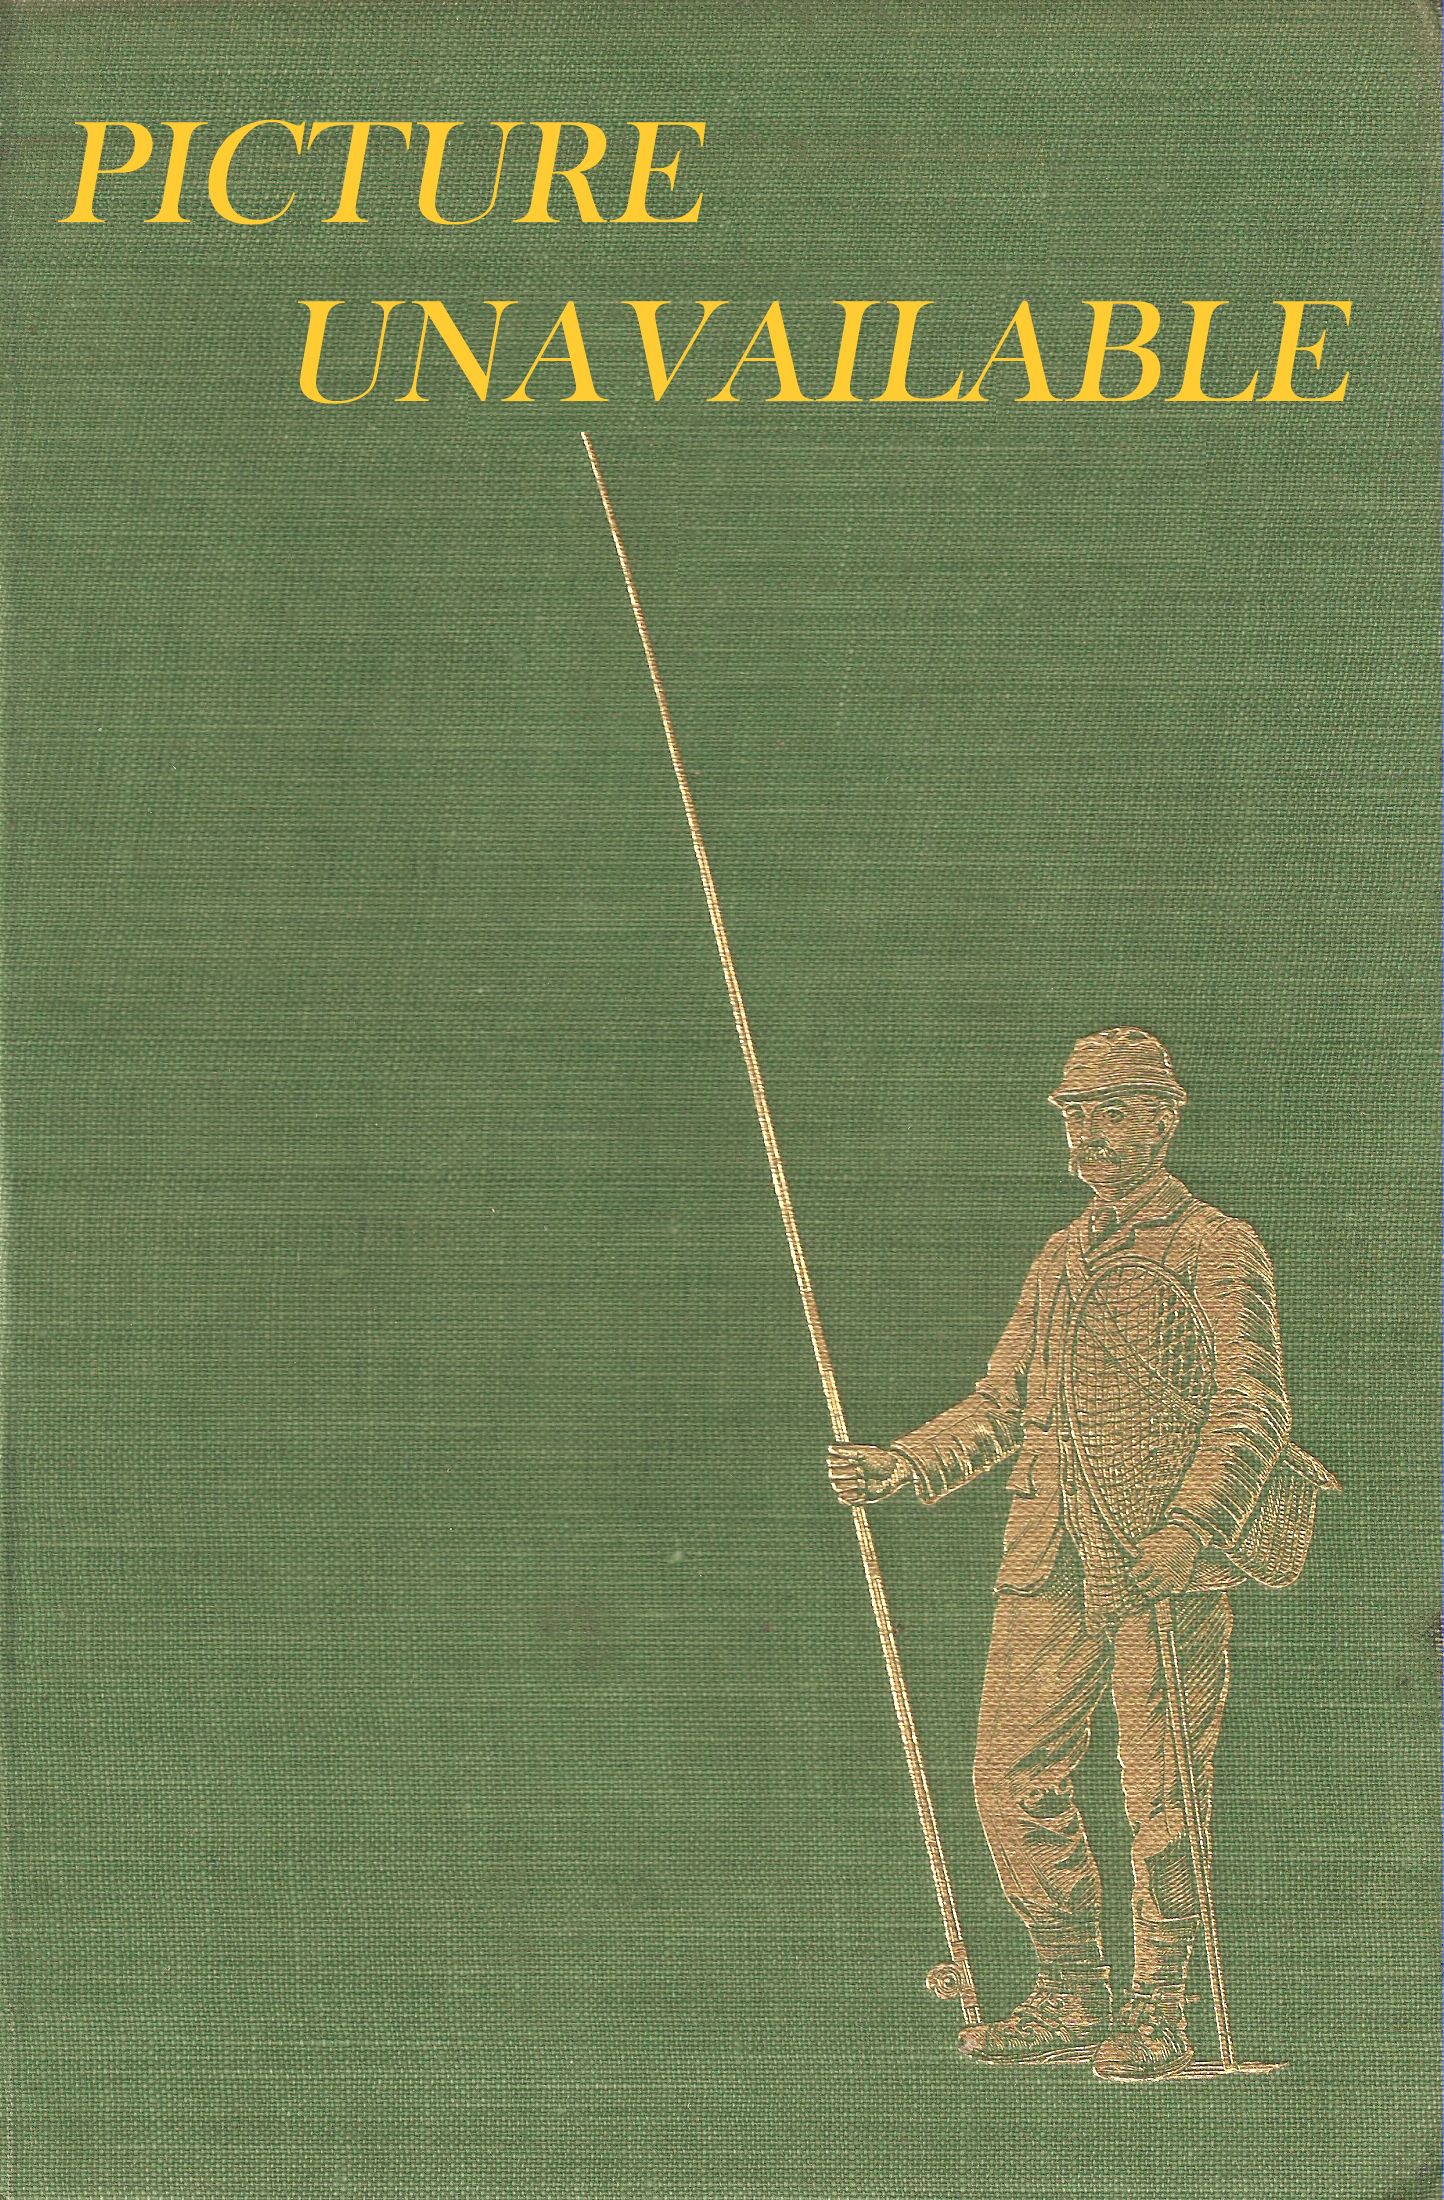 WET-FLY FISHING TREATED METHODICALLY. By E.M. Tod. First Edition.